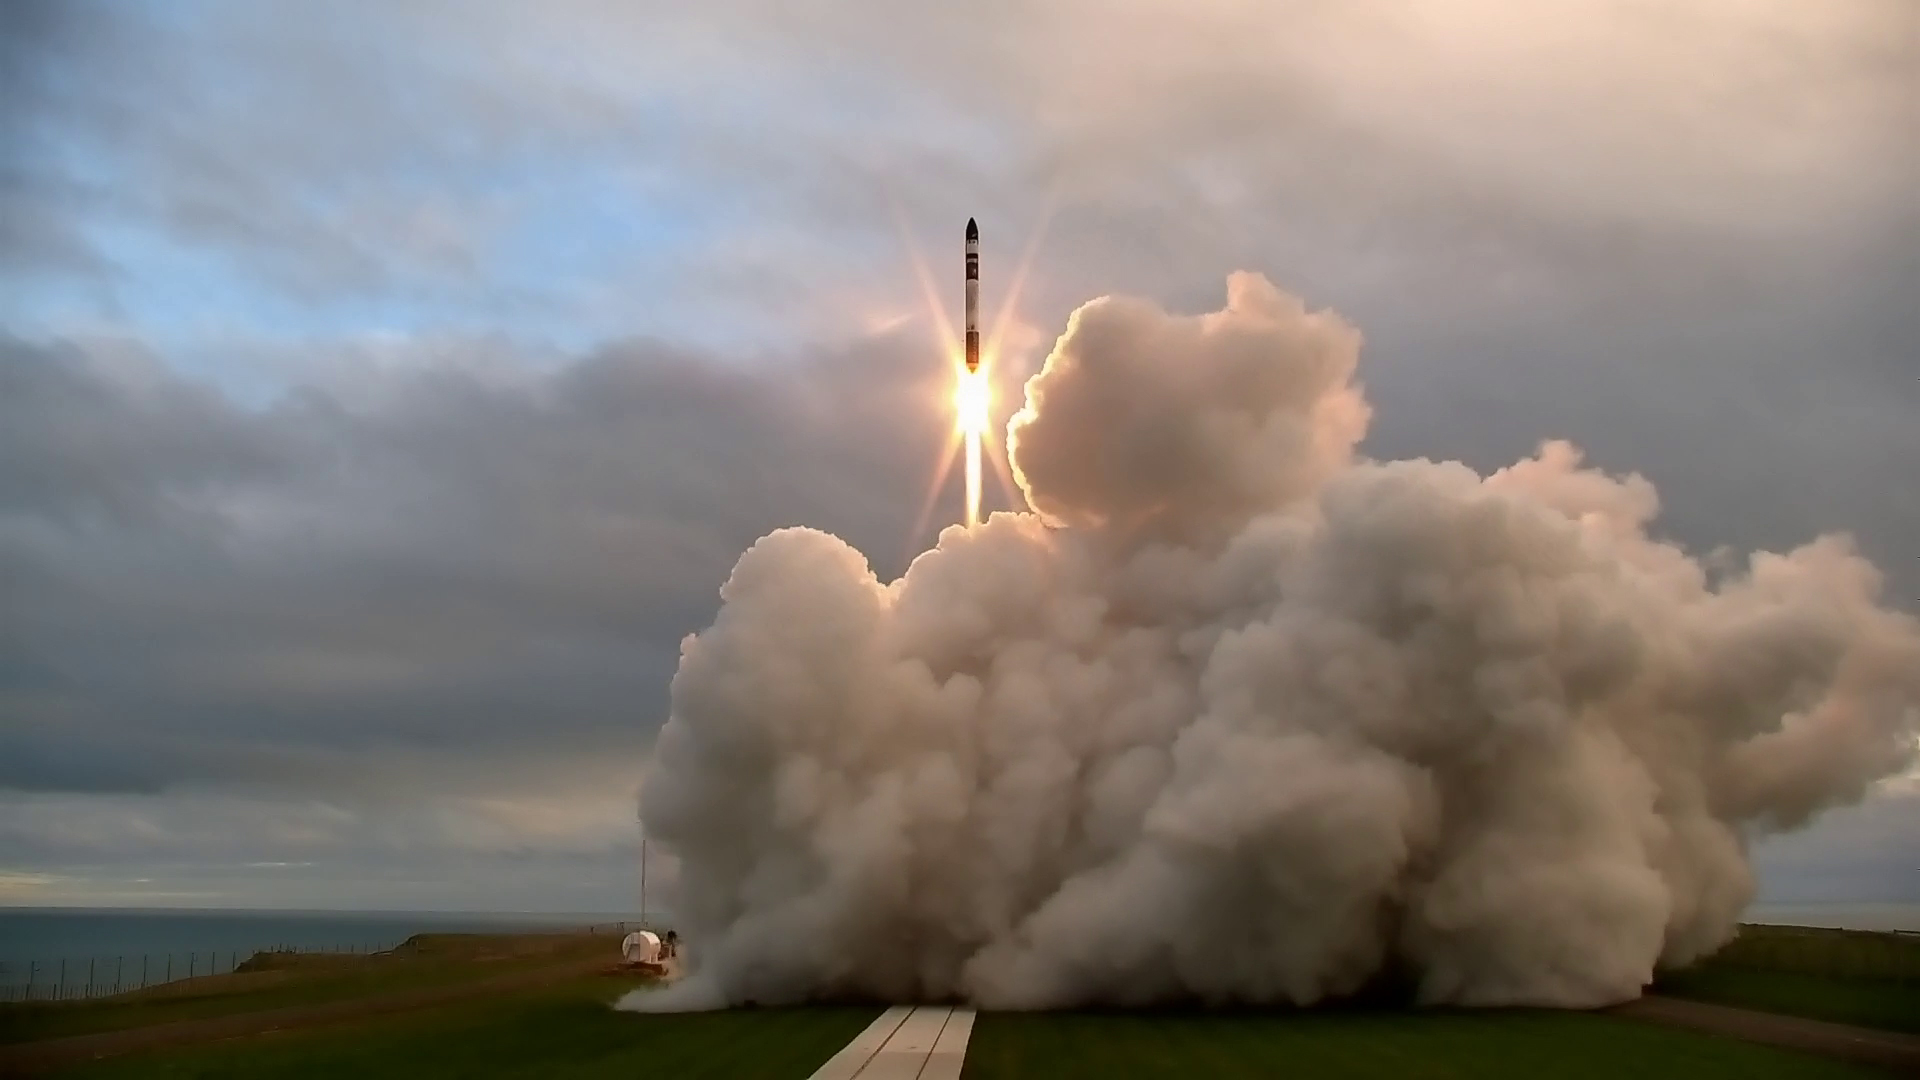 Electron 'Its a Test' lift off